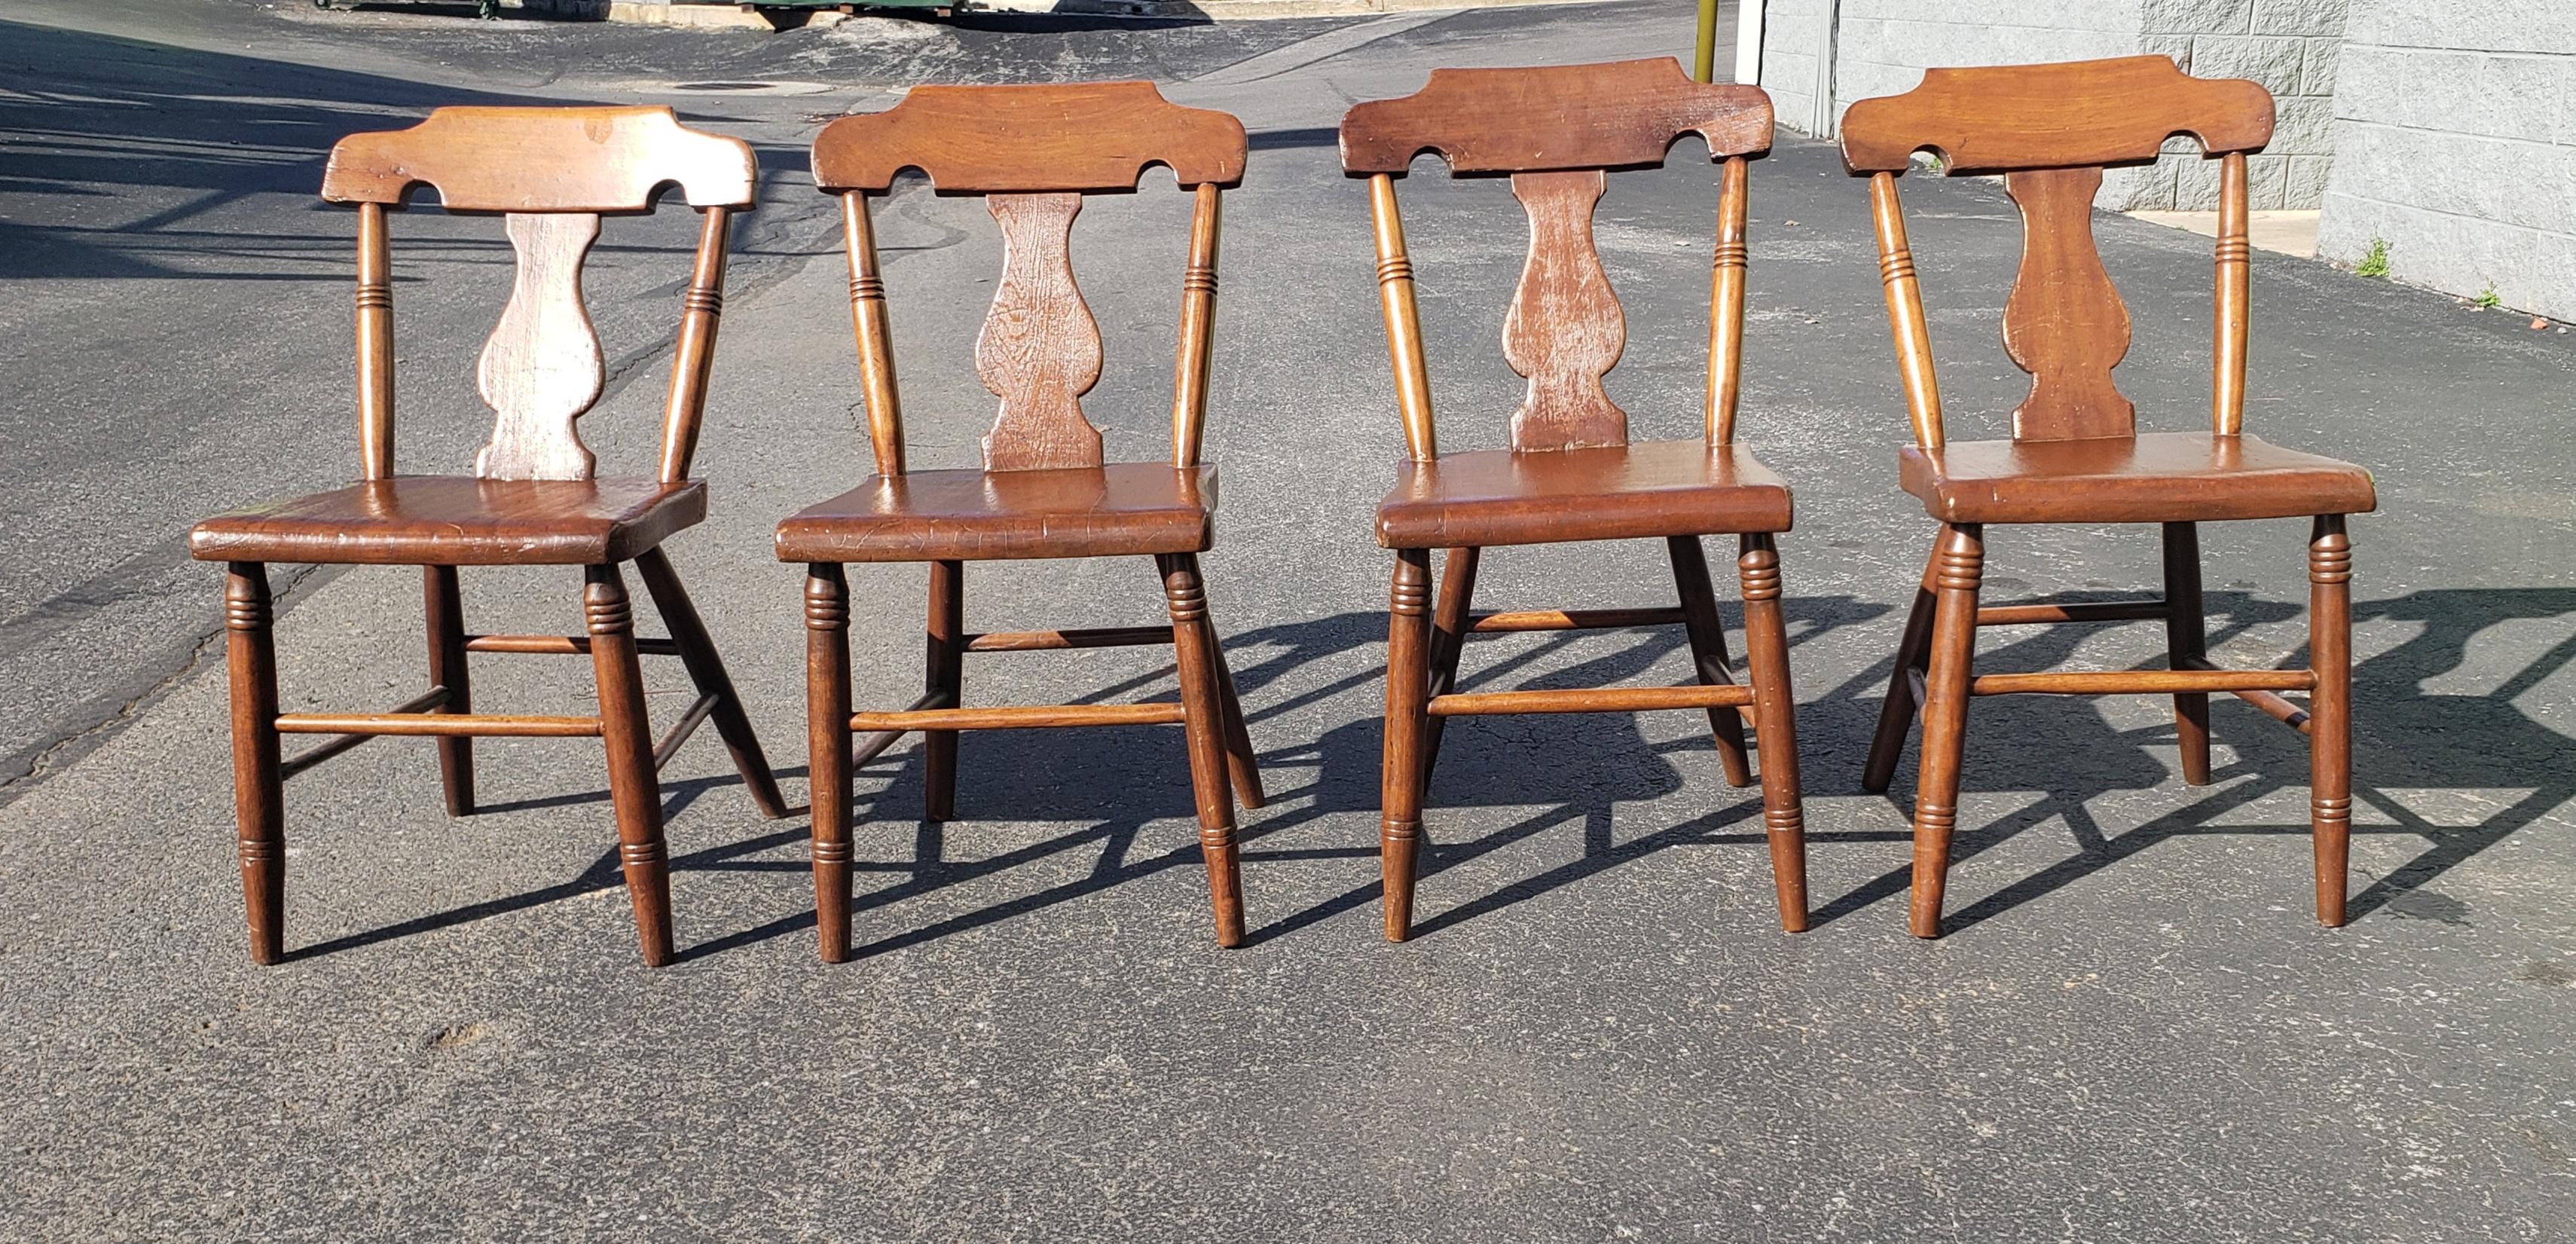 A set 4 early American yew wood side chair. Very sturdy and in good condition.